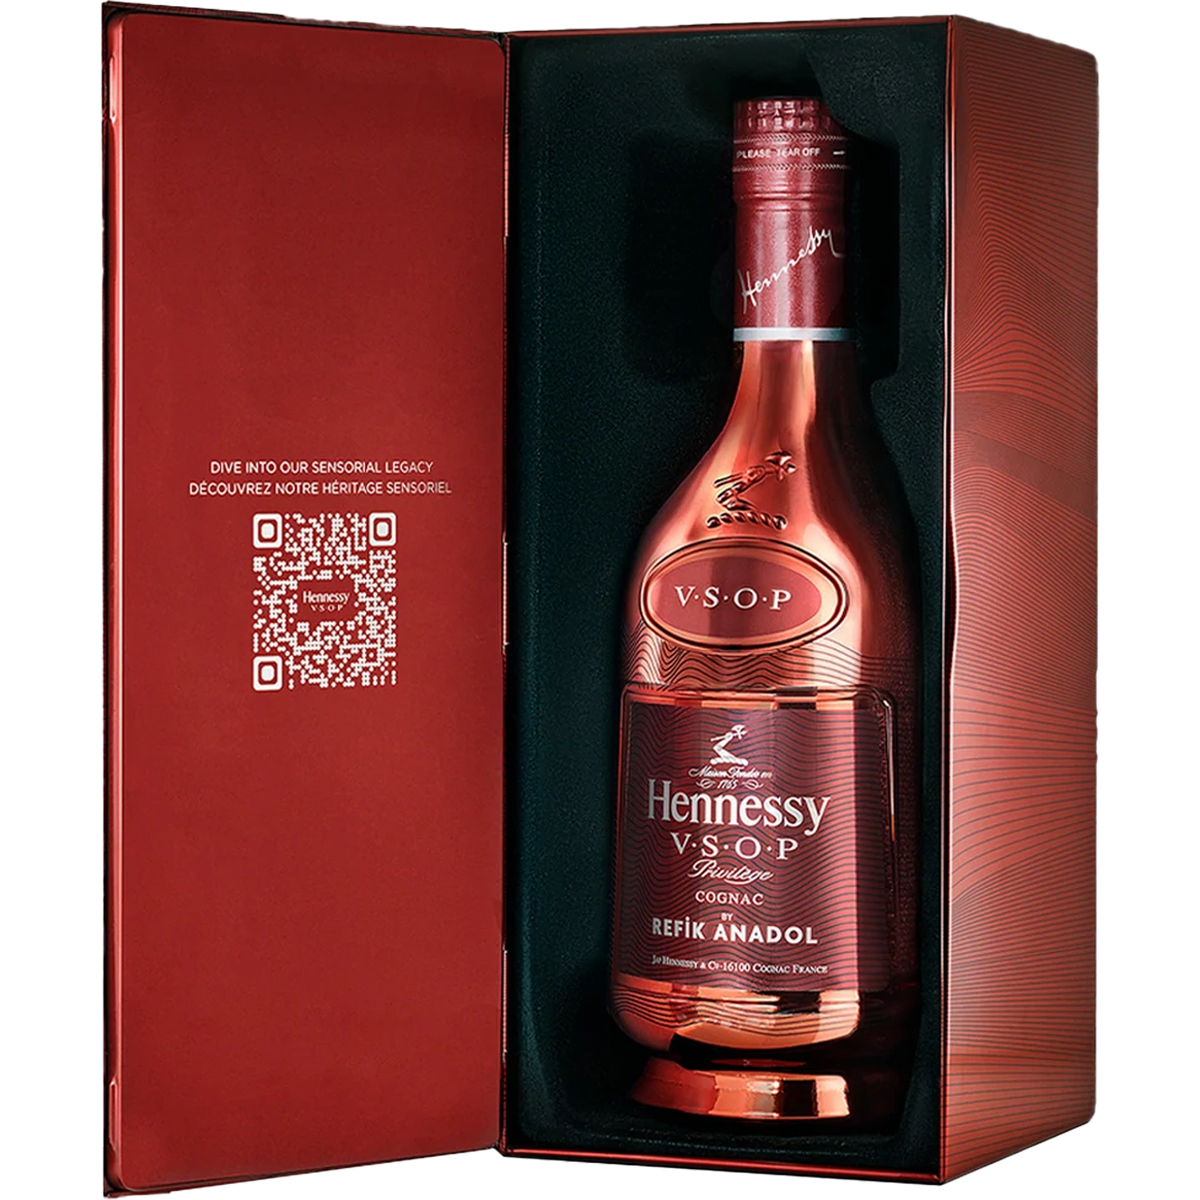 Buy Hennessy VS Limited Edition Cognac by Faith XLVII Online!